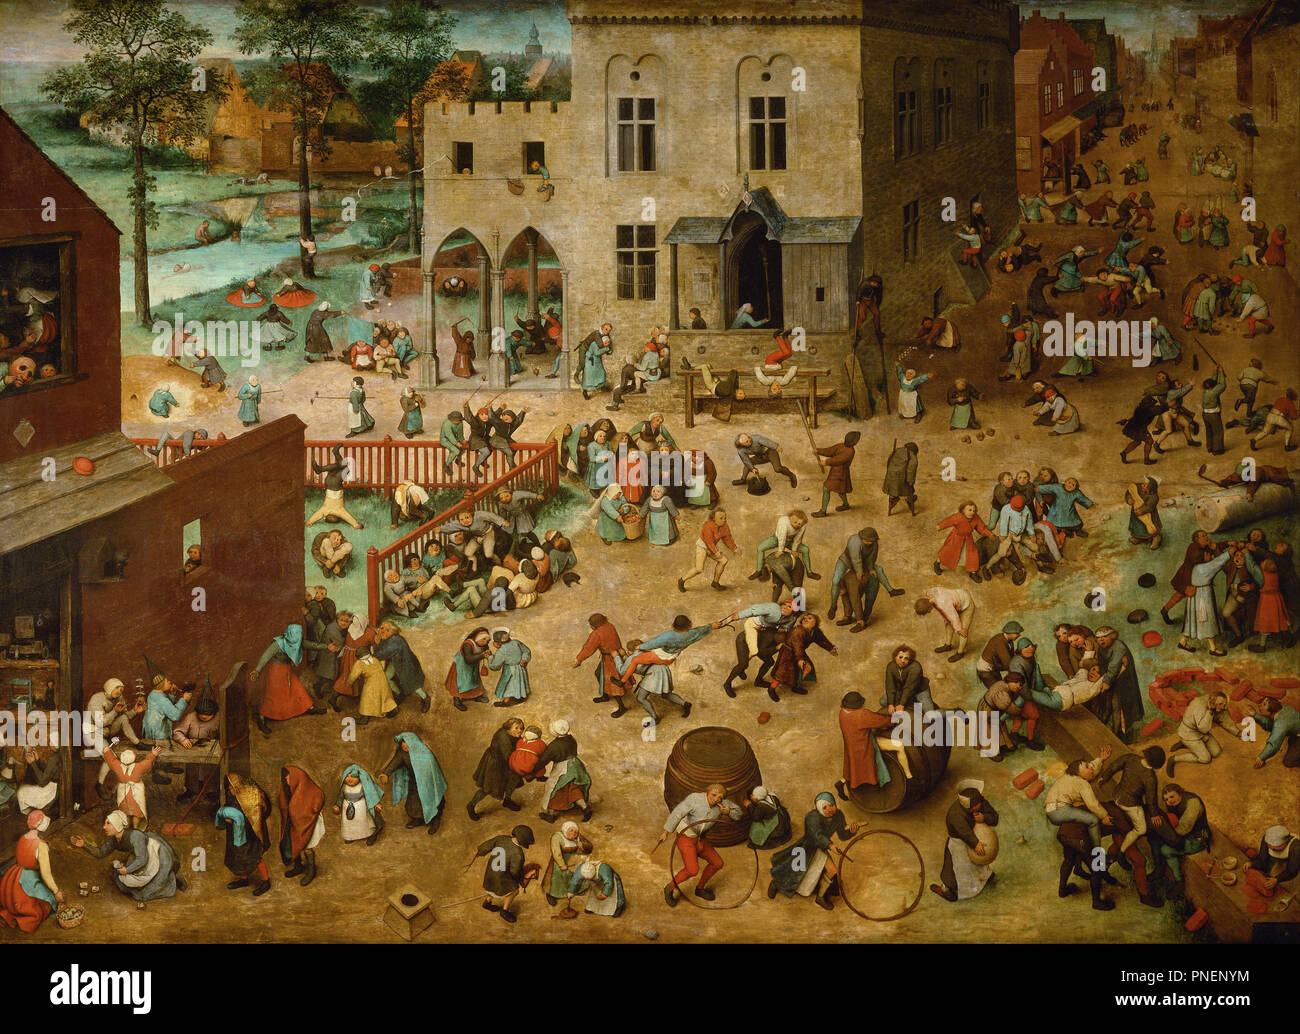 Children's Games. Date/Period: 1560. Painting. Oil on wood. Height: 1,180 mm (46.45 in); Width: 1,610 mm (63.38 in). Author: Pieter Brueghel The Elder. PIETER BRUEGEL, THE ELDER. BRUEGEL THE ELDER, PIETER. Bruegel (Brueghel), Pieter, the Elder. Stock Photo